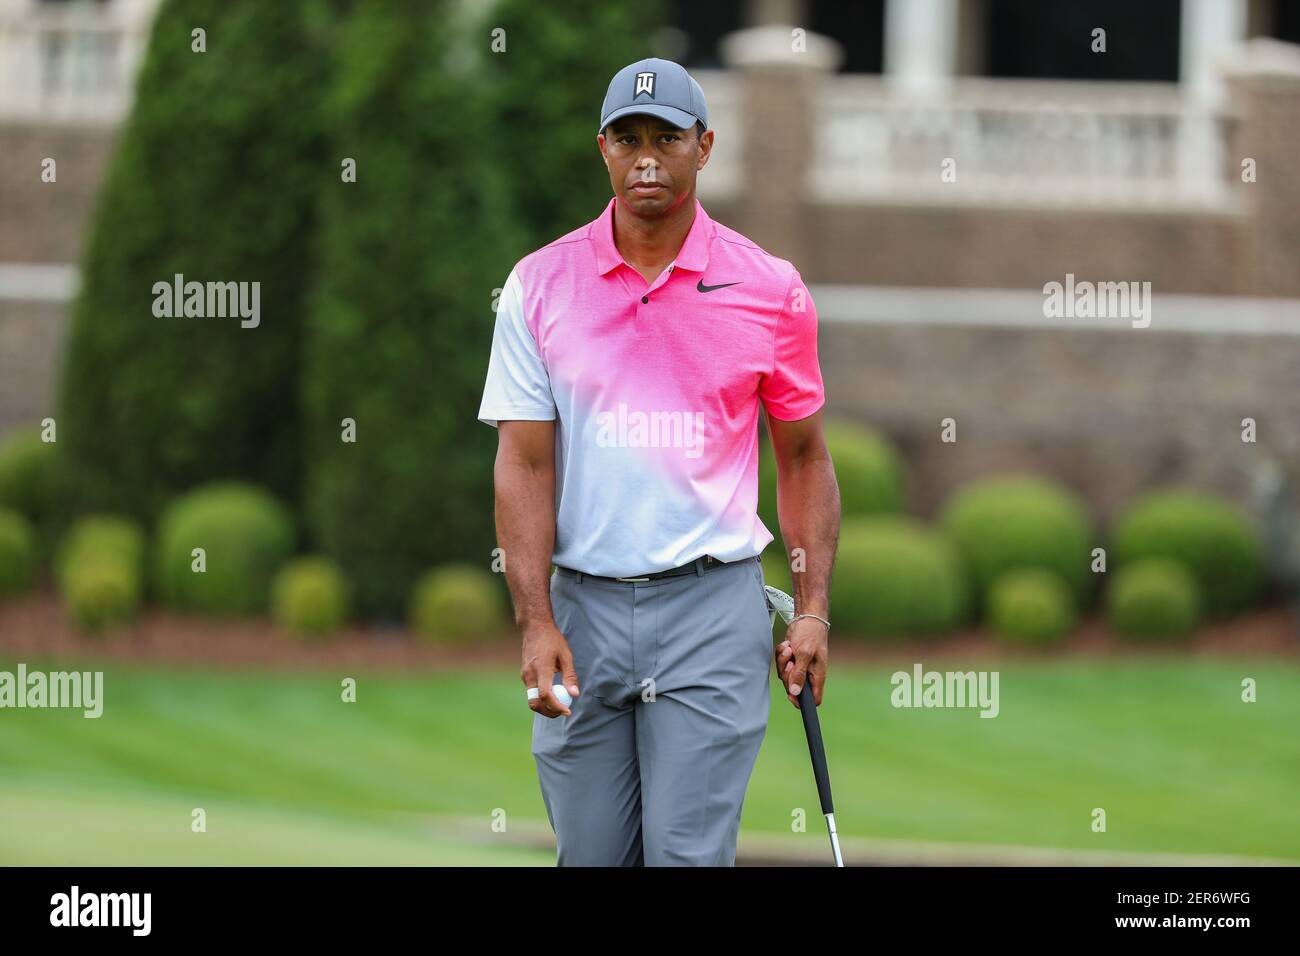 May 5, 2018; Charlotte, NC, USA; Tiger Woods during the third round of the Wells Fargo Championship golf tournament at Quail Hollow Club. Mandatory Credit: Jim Dedmon-USA TODAY Sports Stock Photo